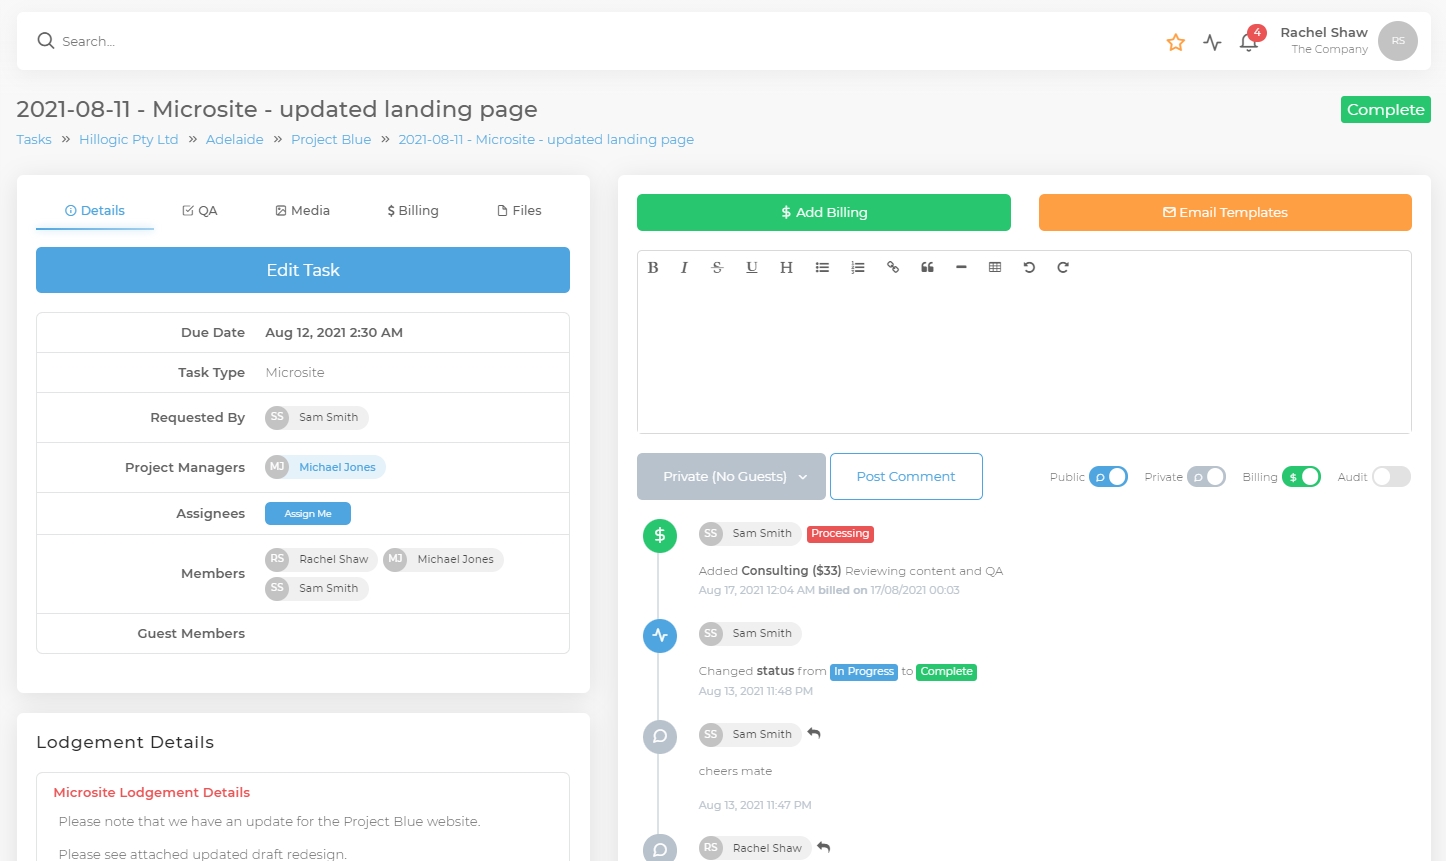 The task assigned to multiple users with task details, timeline, QA, Billing, file sharing and more